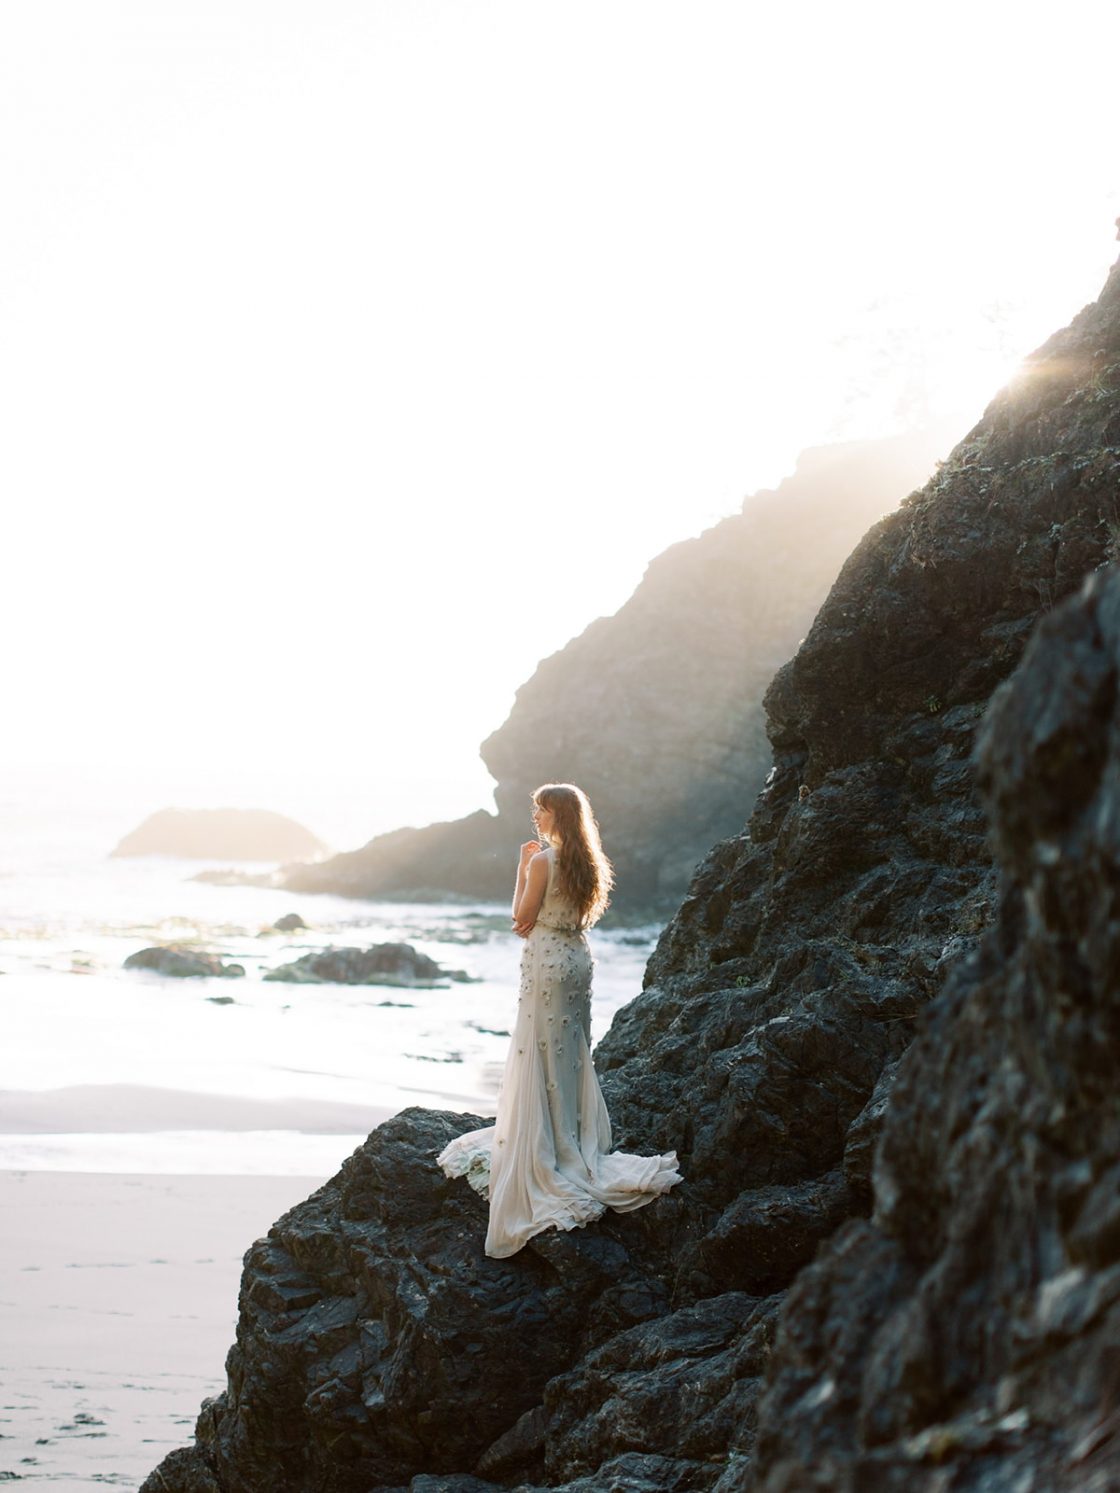 Pacific Ocean Sea Inspired Wedding by Sean Smith Photography 4